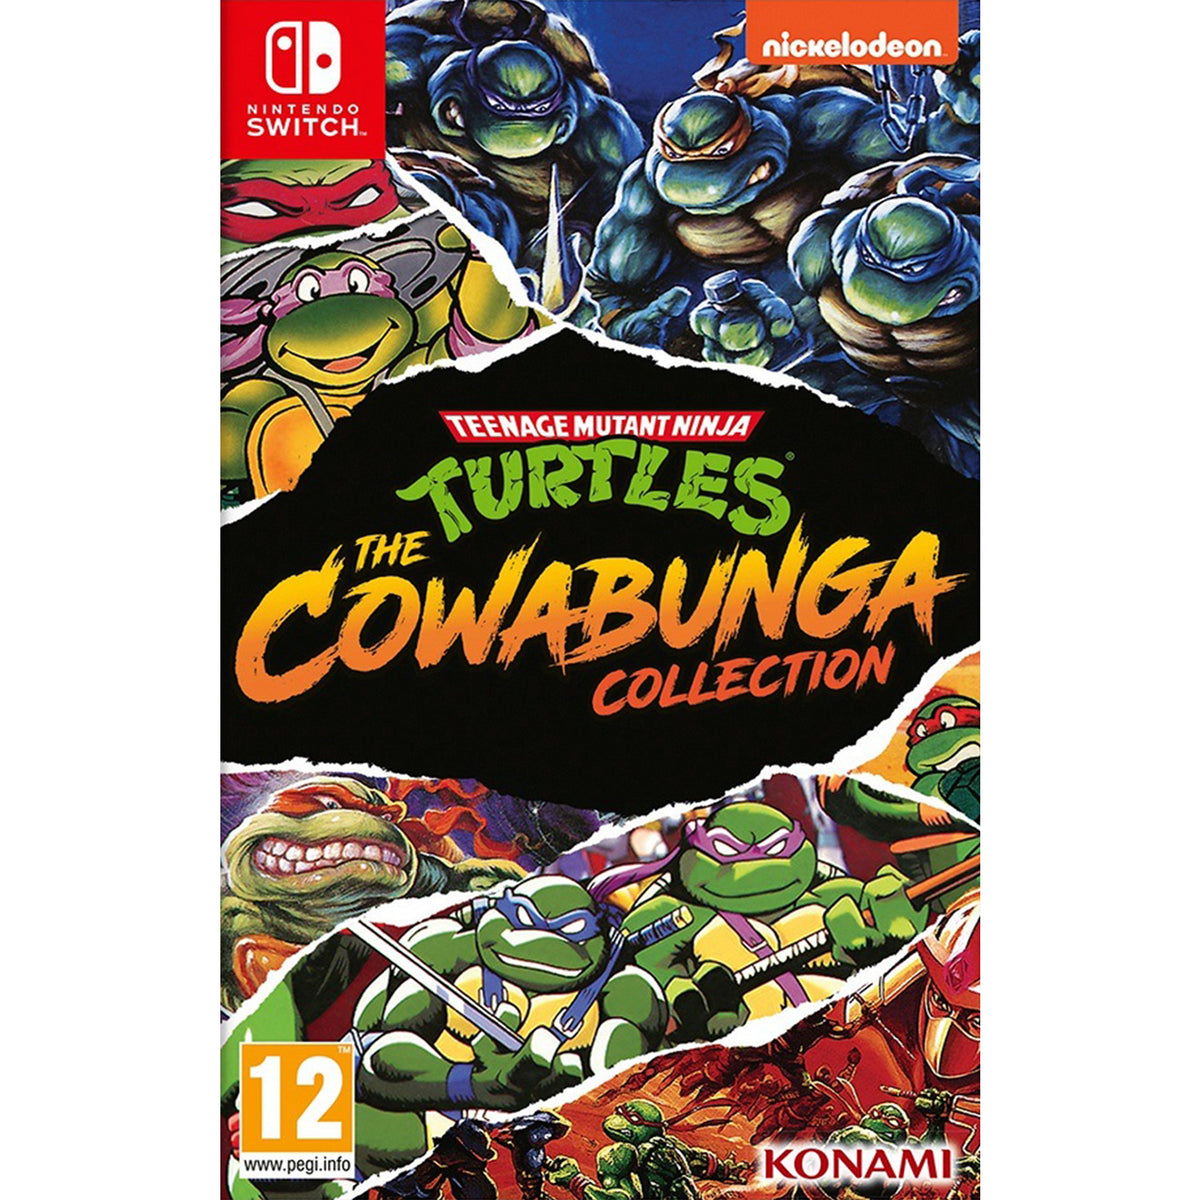 Teenage Mutant Ninja Turtles: The Cowabunga Collection - Switch –  Entertainment Go\'s Deal Of The Day!